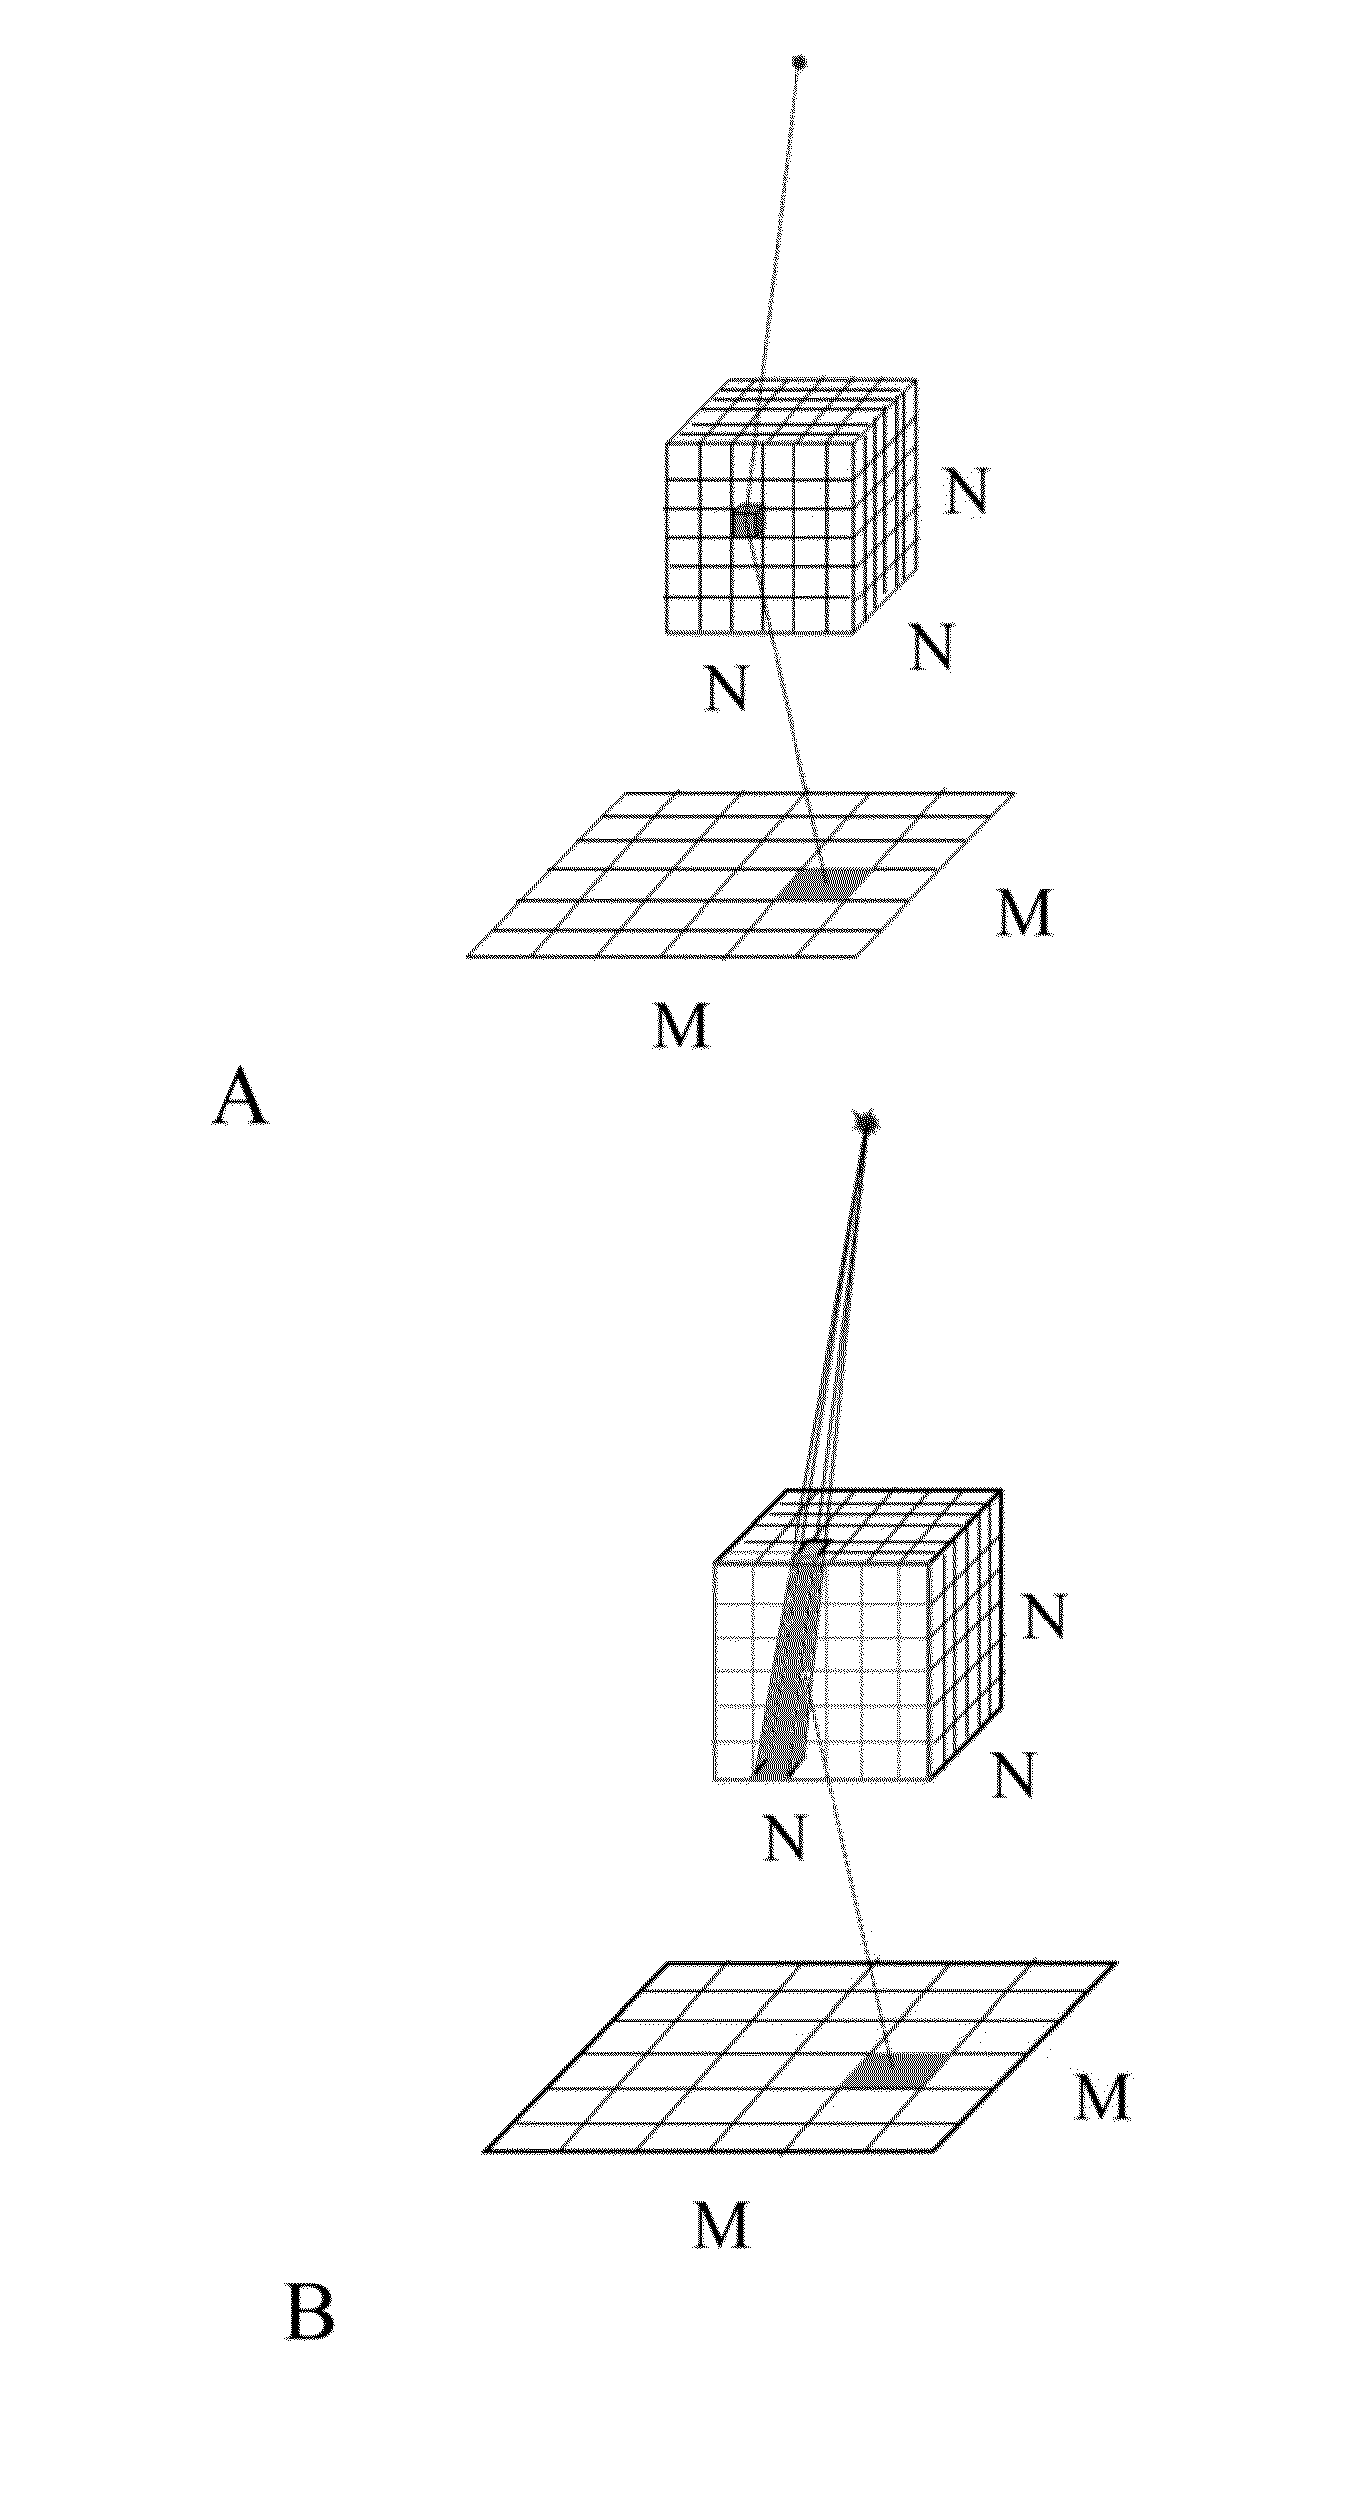 Systems and Methods for Improving Image Quality in Cone Beam Computed Tomography